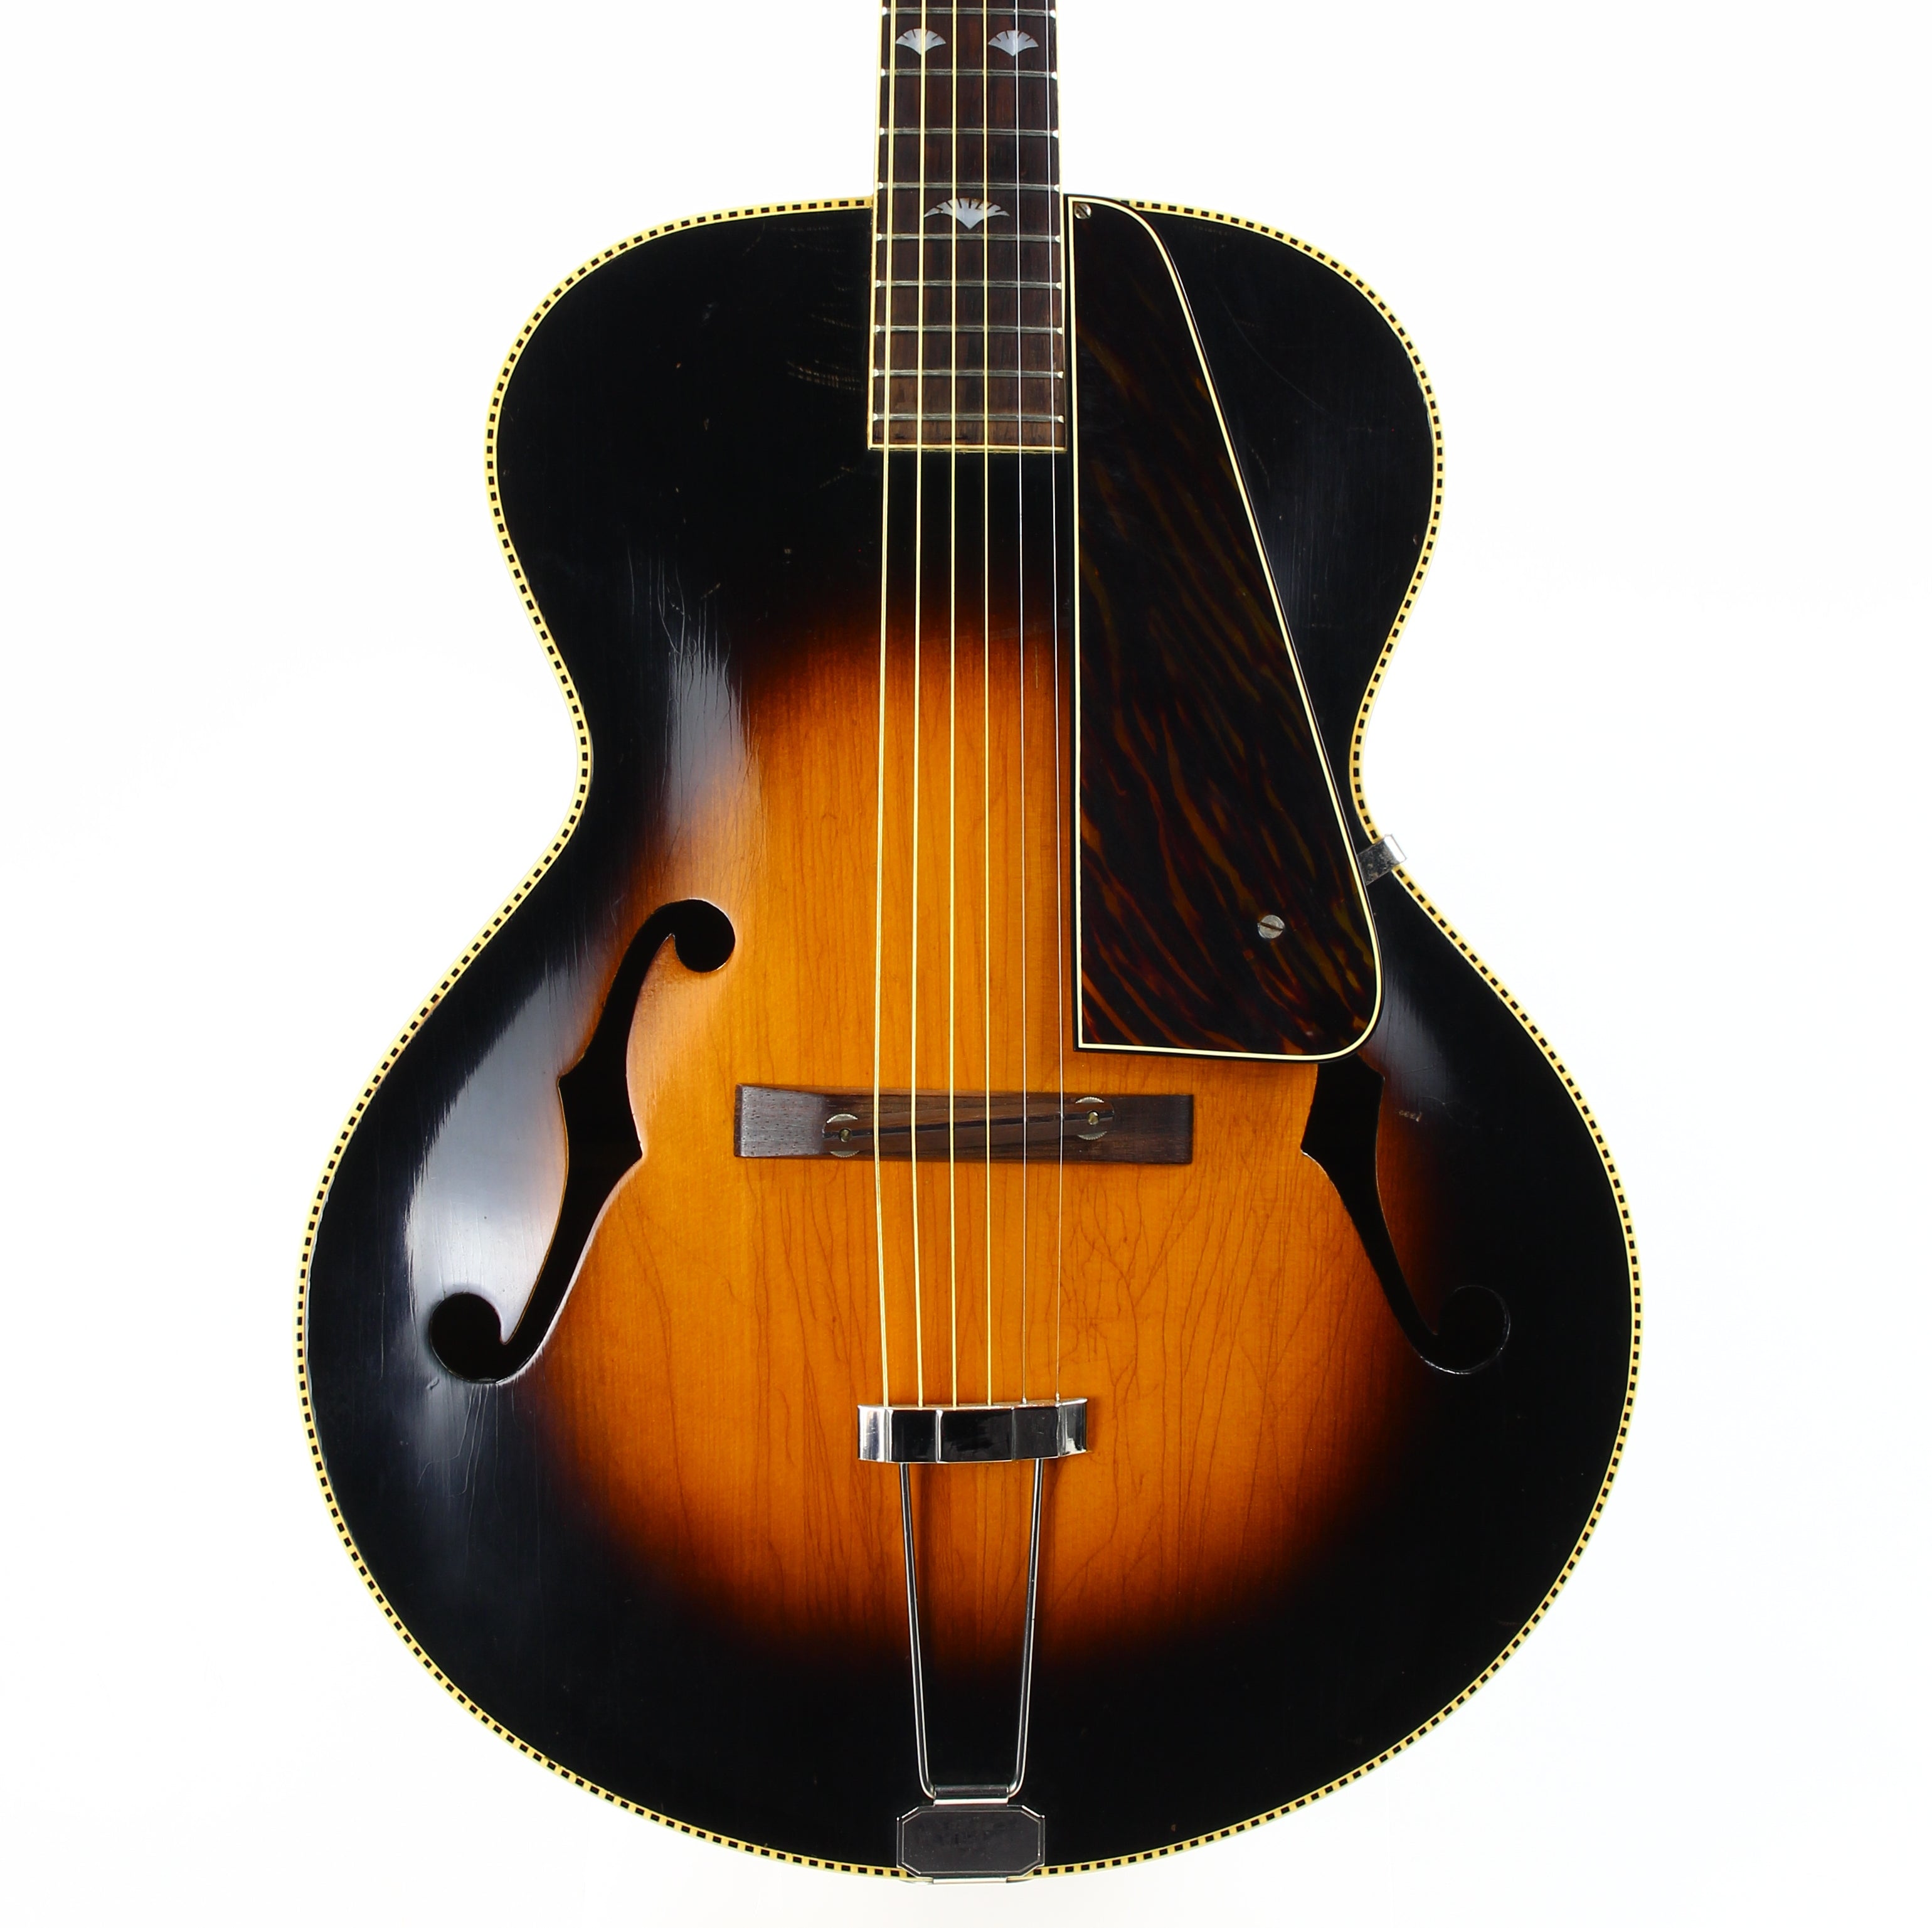 *SOLD*  1936 Gibson Recording King M5 Archtop 16-Inch - L-5, L-10, L-4